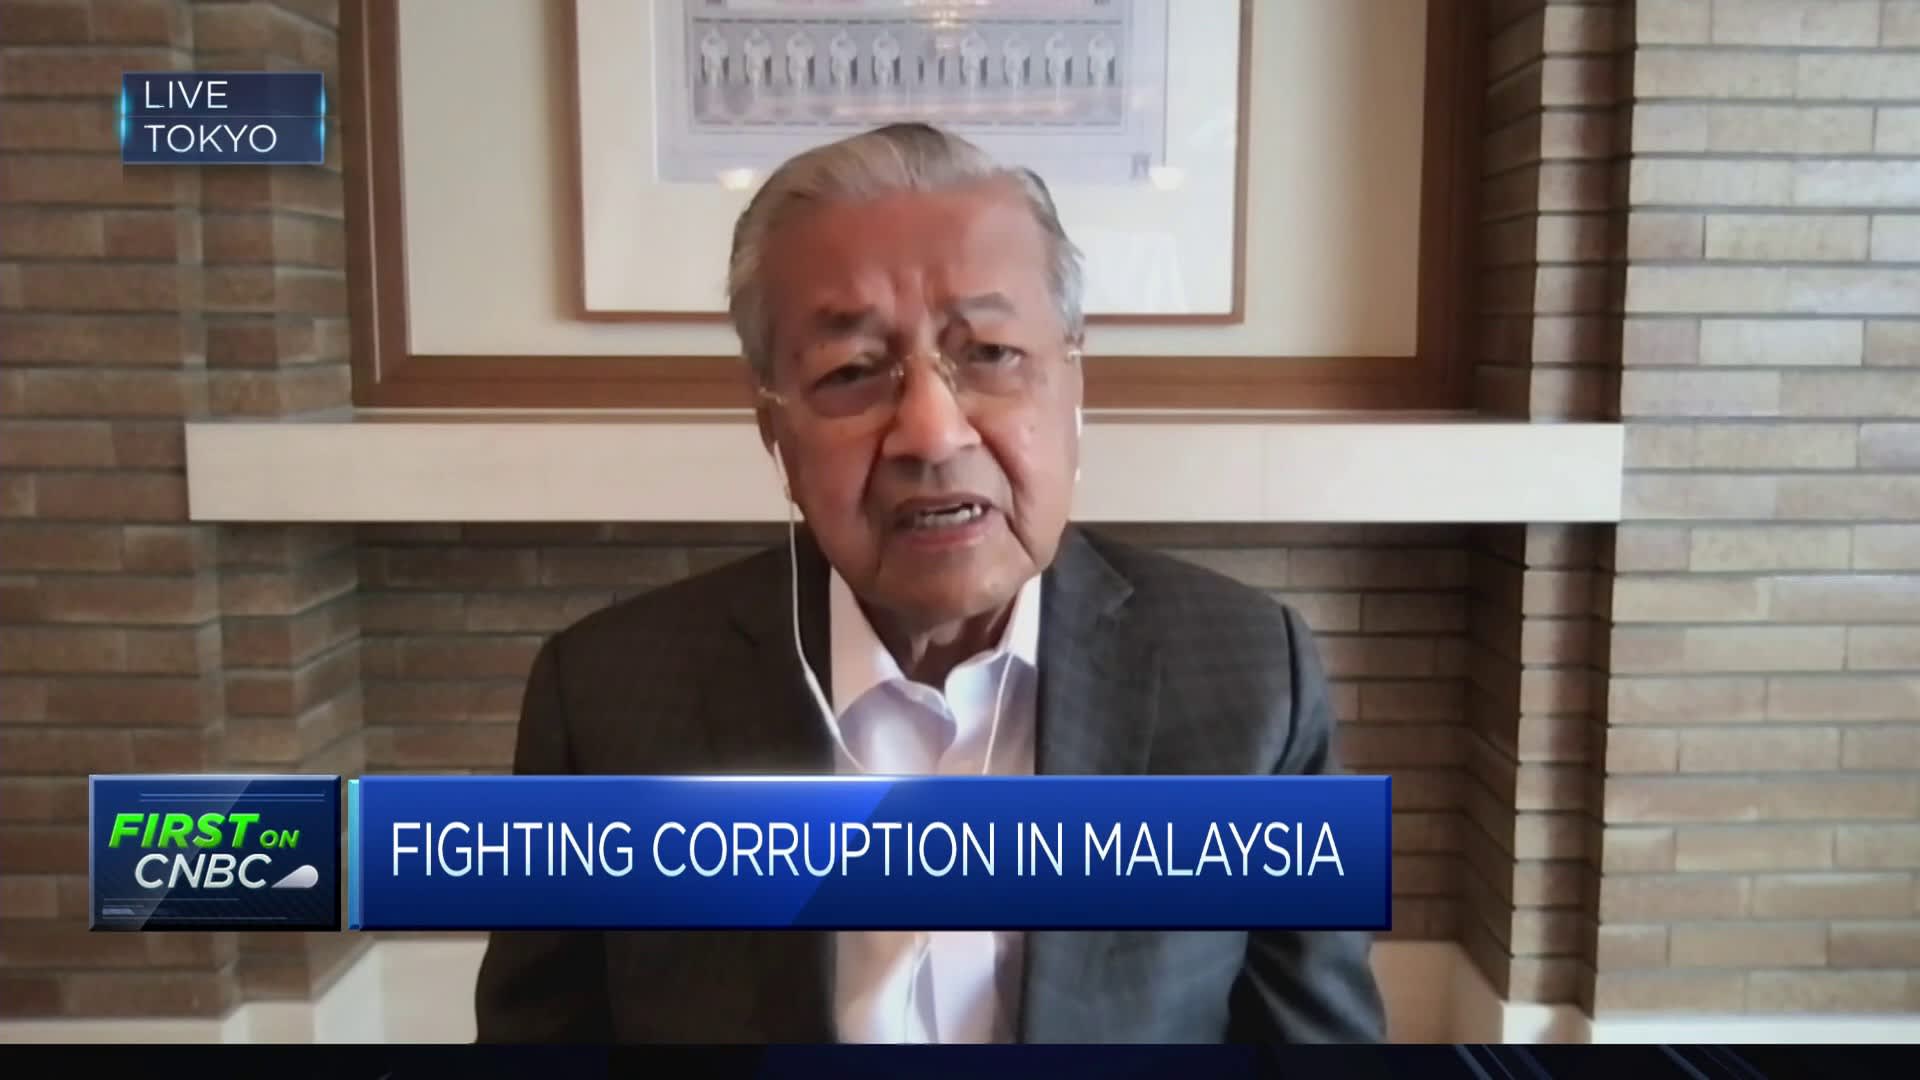 'I myself was not involved in corrupt practices,' Malaysia's Mahathir says